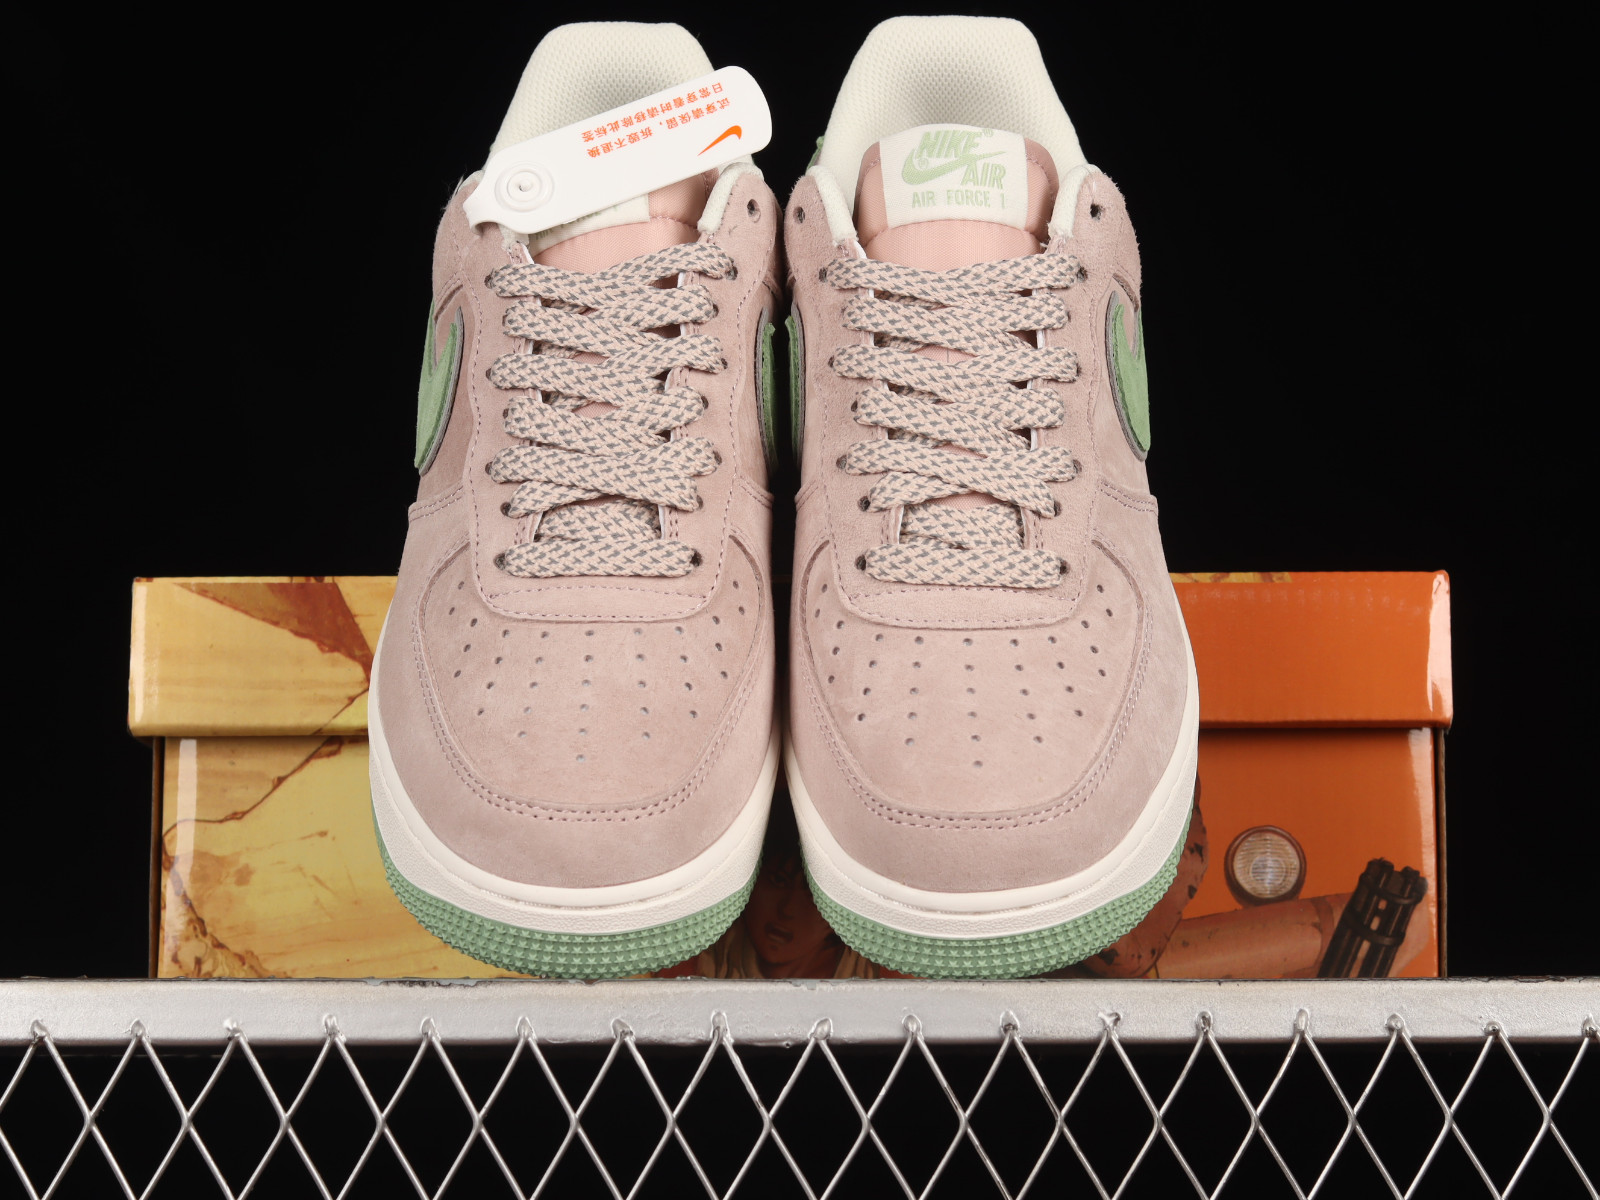 065 - Akira x Nike Force 1 07 Low Suede Pink Green White DD9969 - MultiscaleconsultingShops - The Nike Joyride Run Flyknit Has Just Landed In Pink "Sunset Tint"